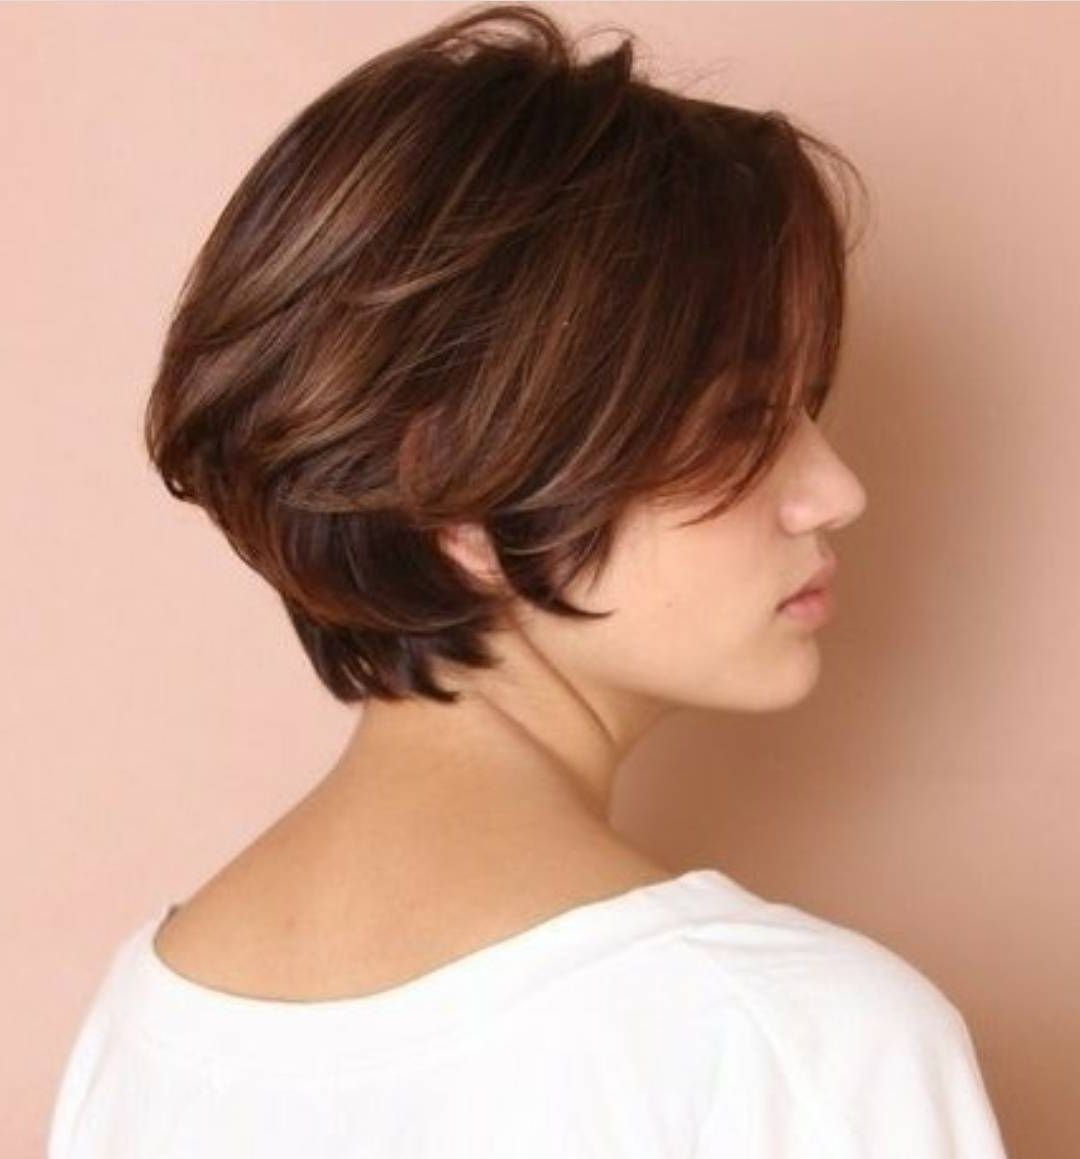 10 Chic Short Bob Haircuts That Balance Your Face Shape! – Short Pertaining To Chic Short Haircuts (View 2 of 25)